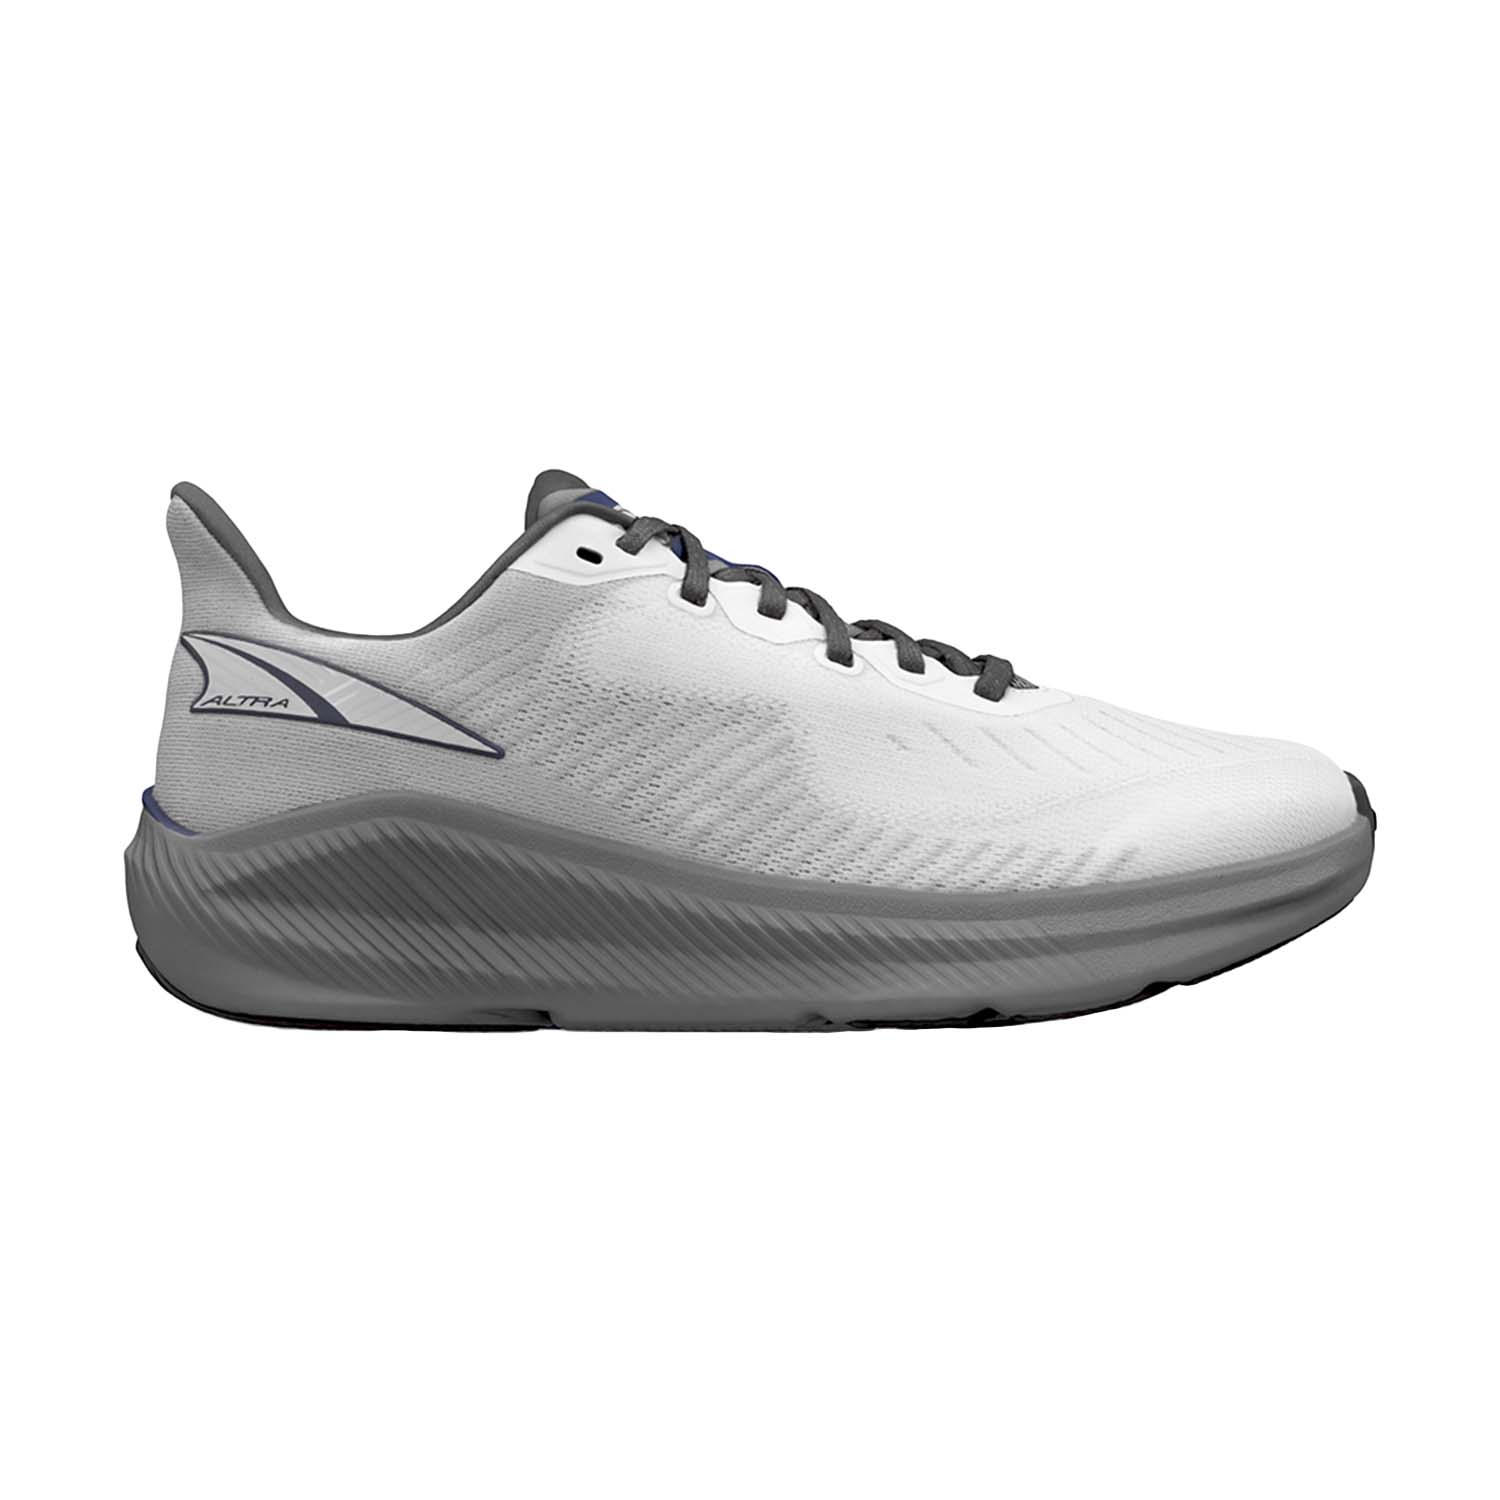 Altra Experience Form - White/Gray